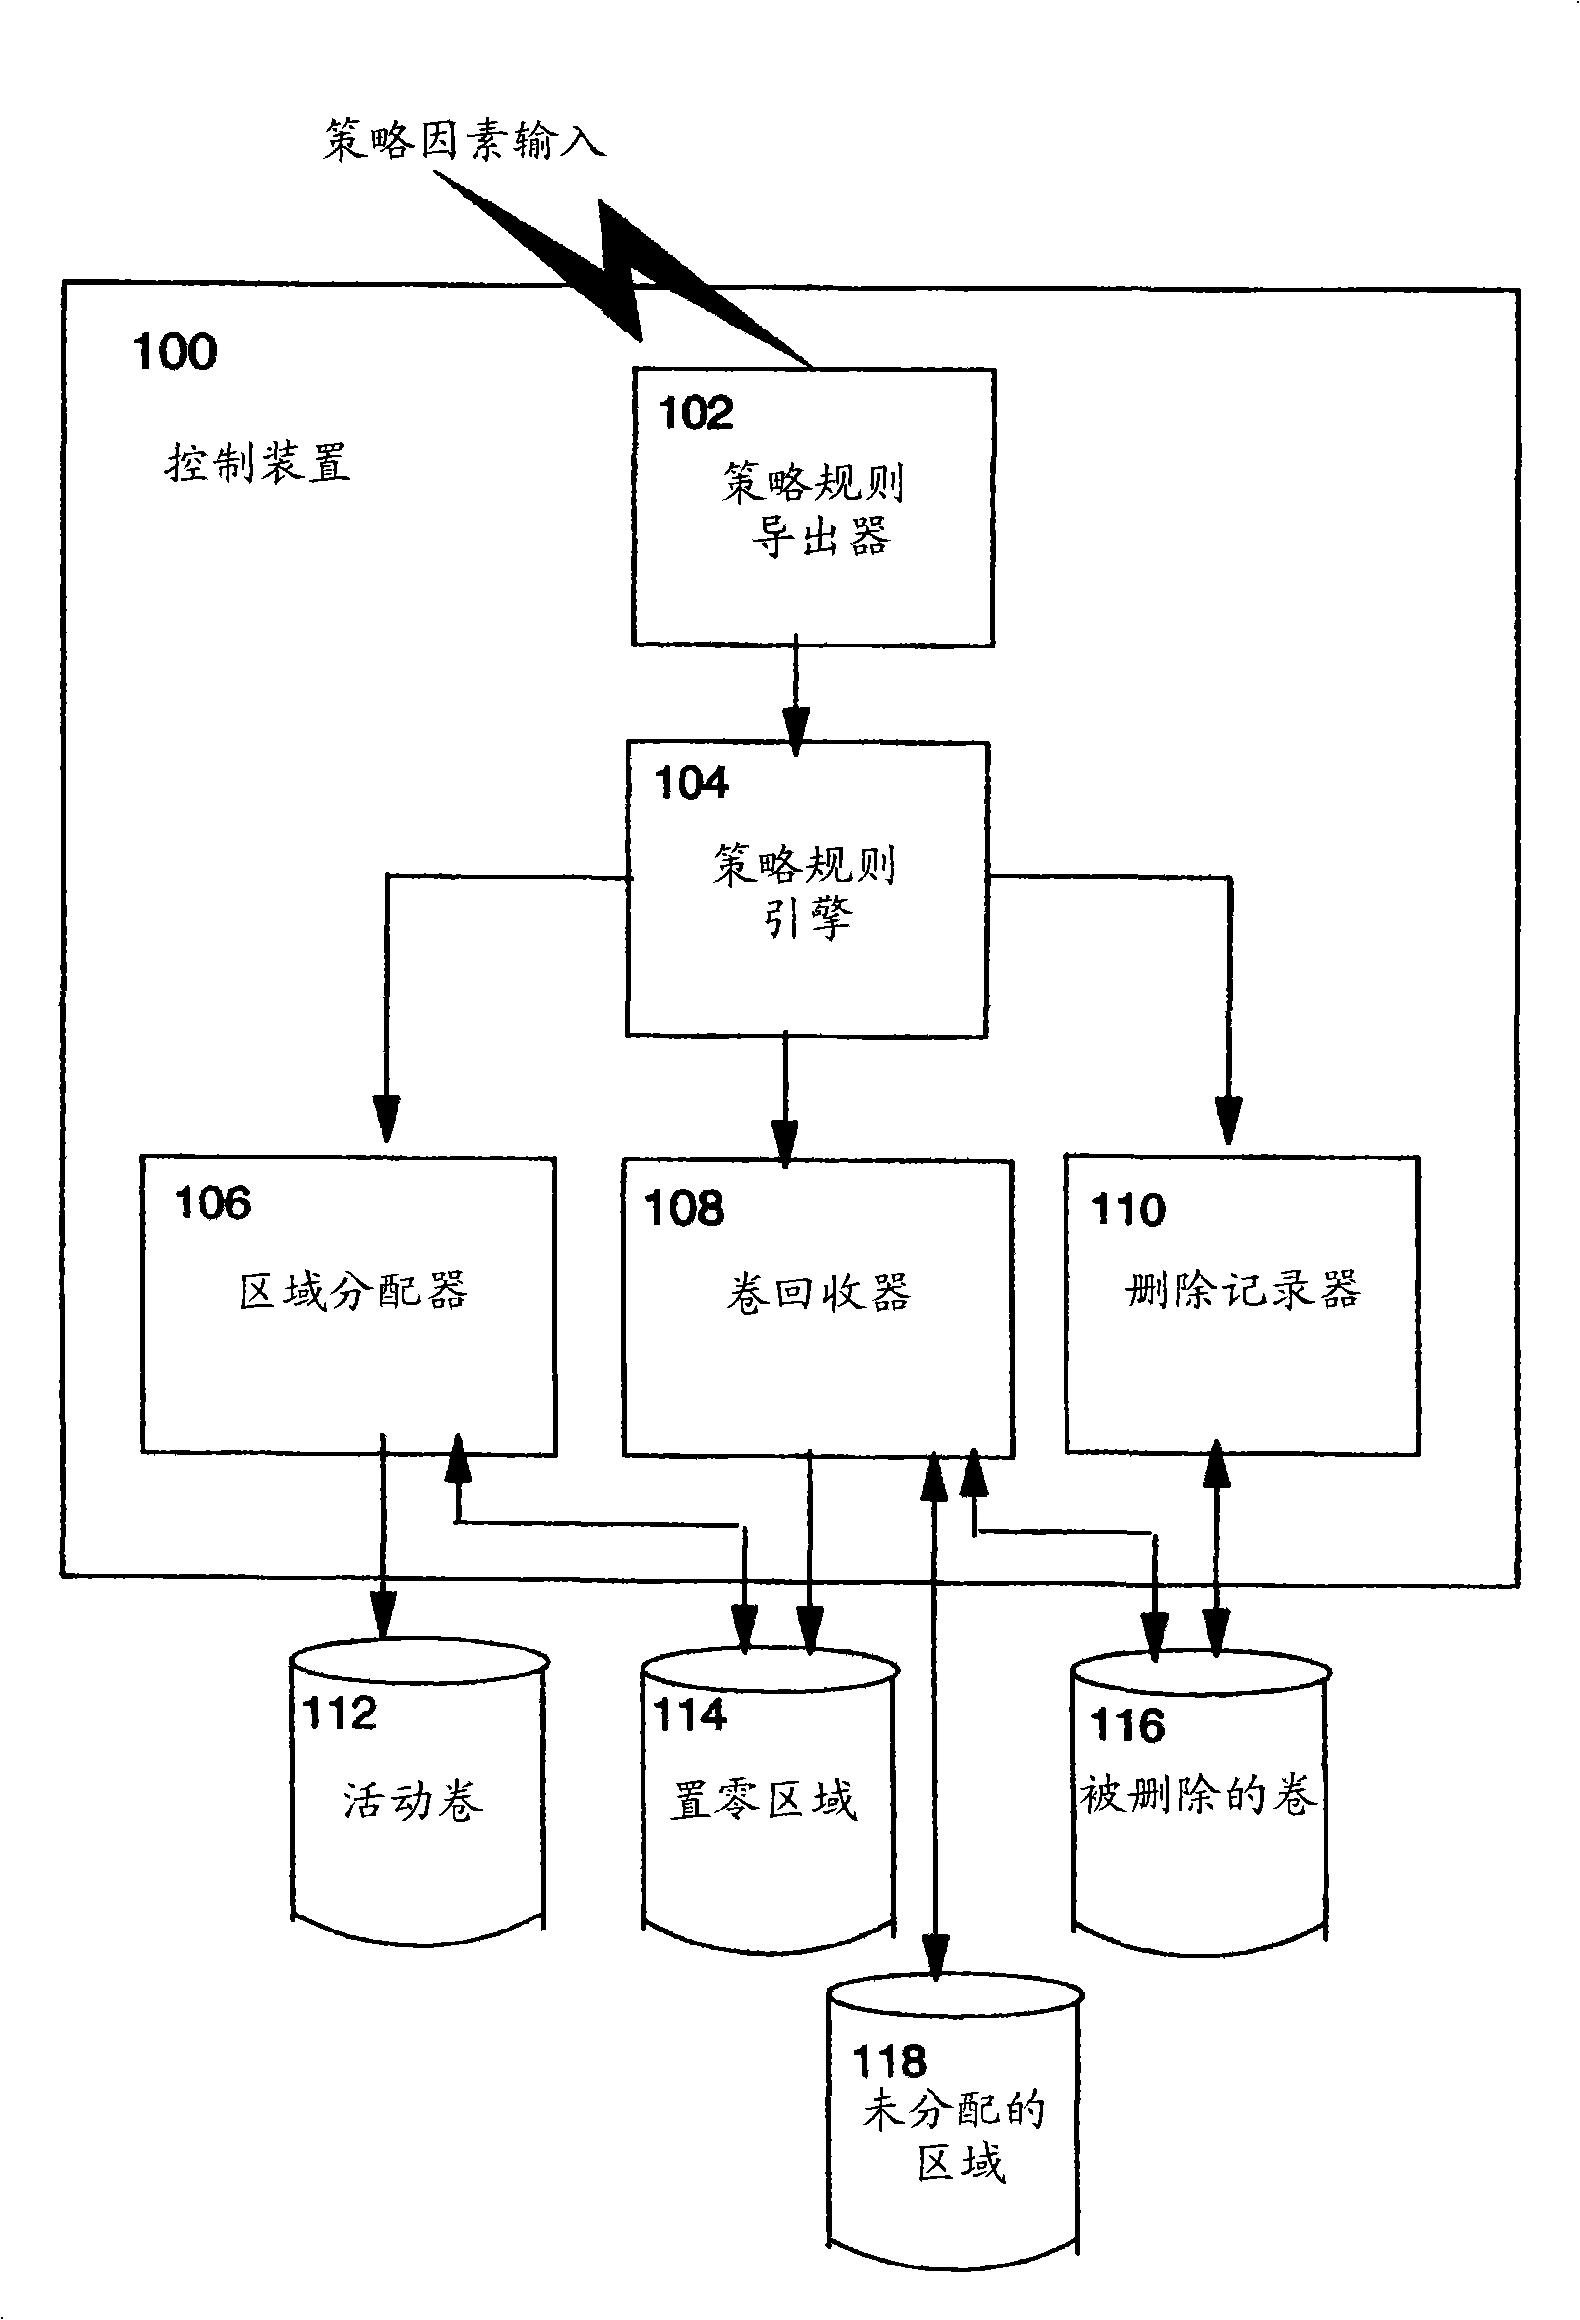 Apparatus and method for resource reclamation in data storage systems